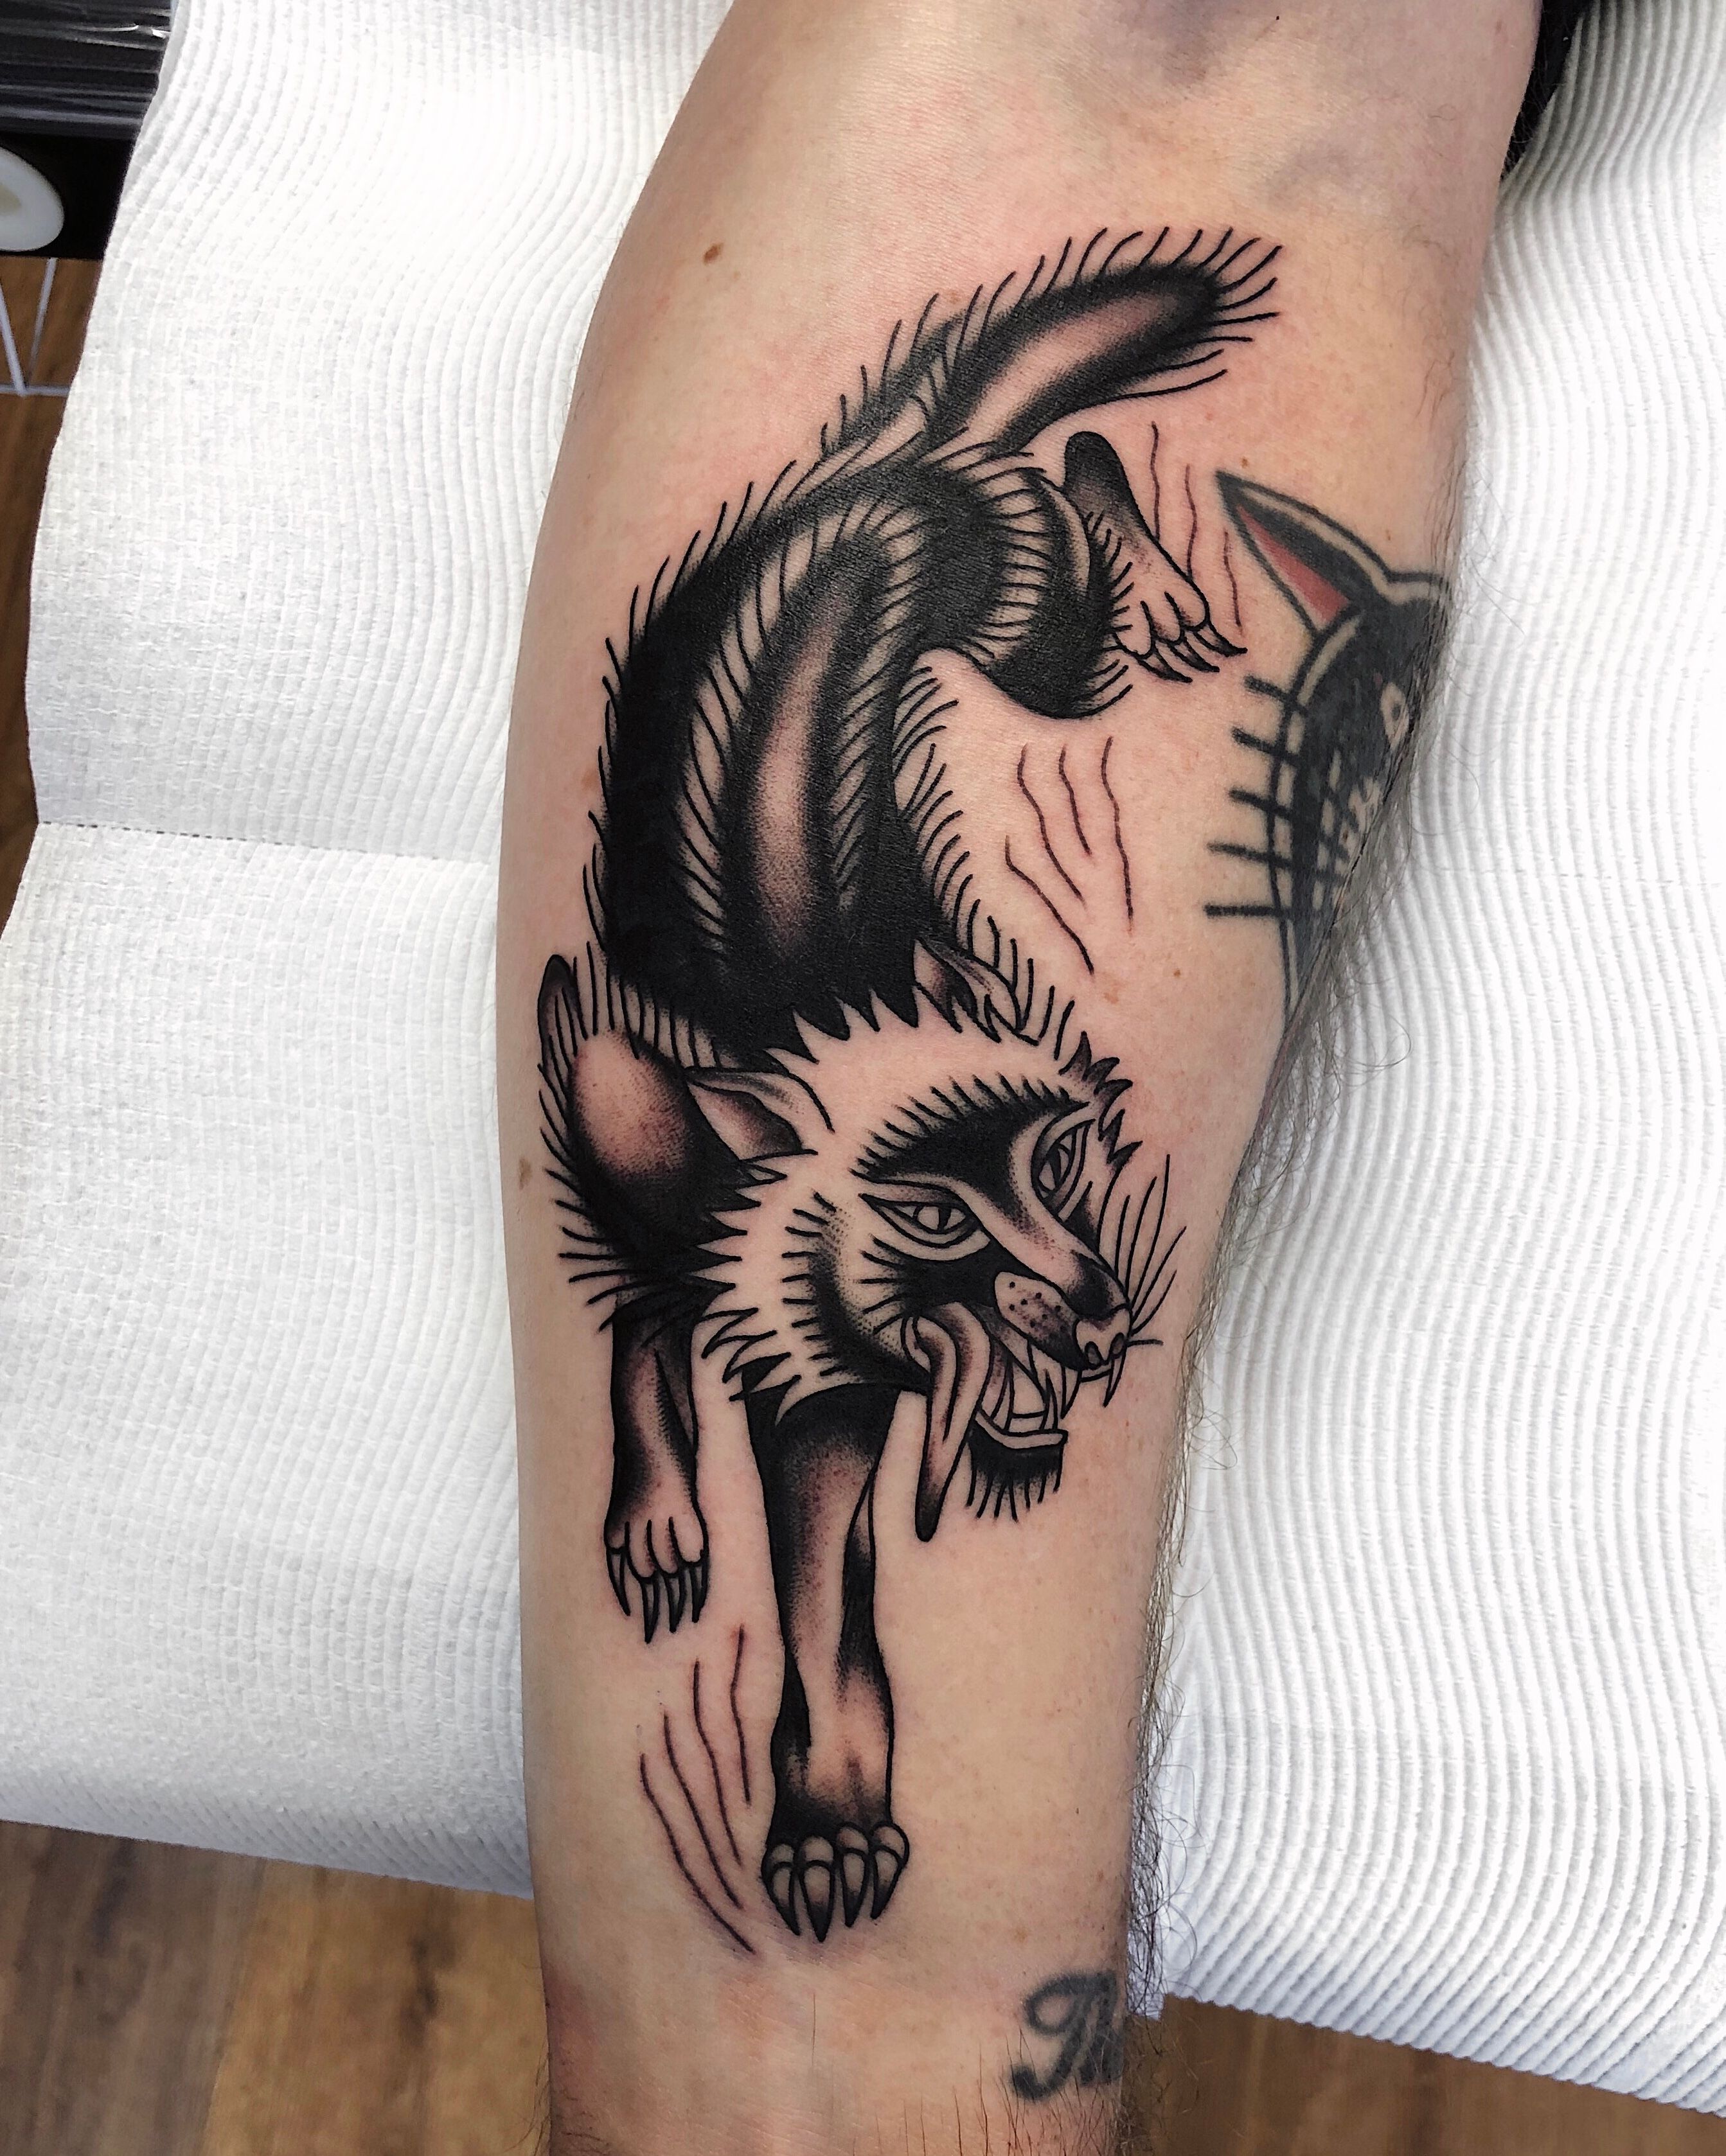 Coyote head by Andy Canino at Dedication Tattoo Denver CO  rtattoos